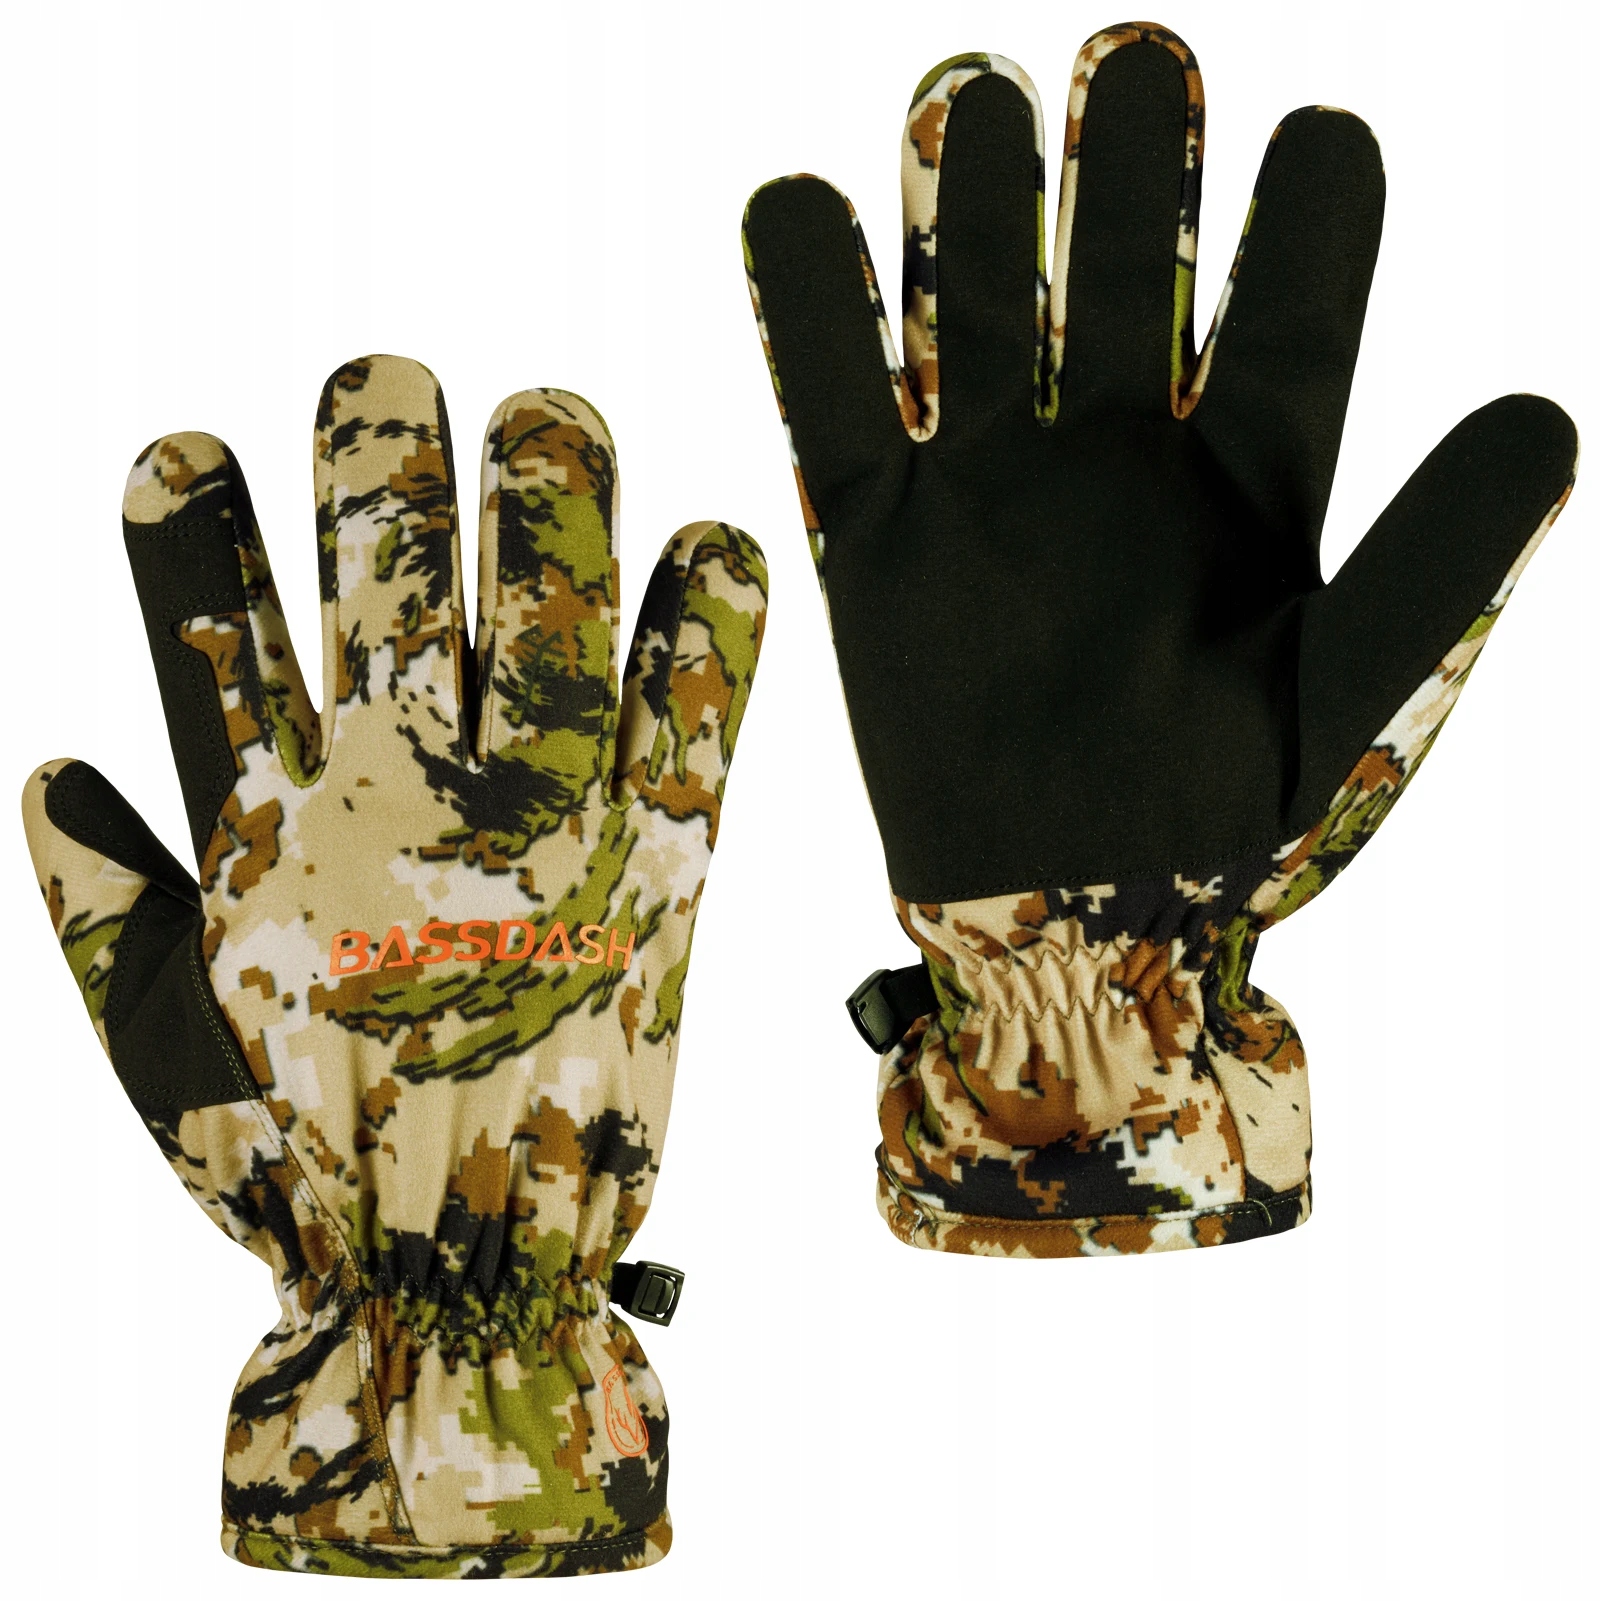 Bassdash Winter Men’s Hunting Gloves Insulated Waterproof for Cold ...